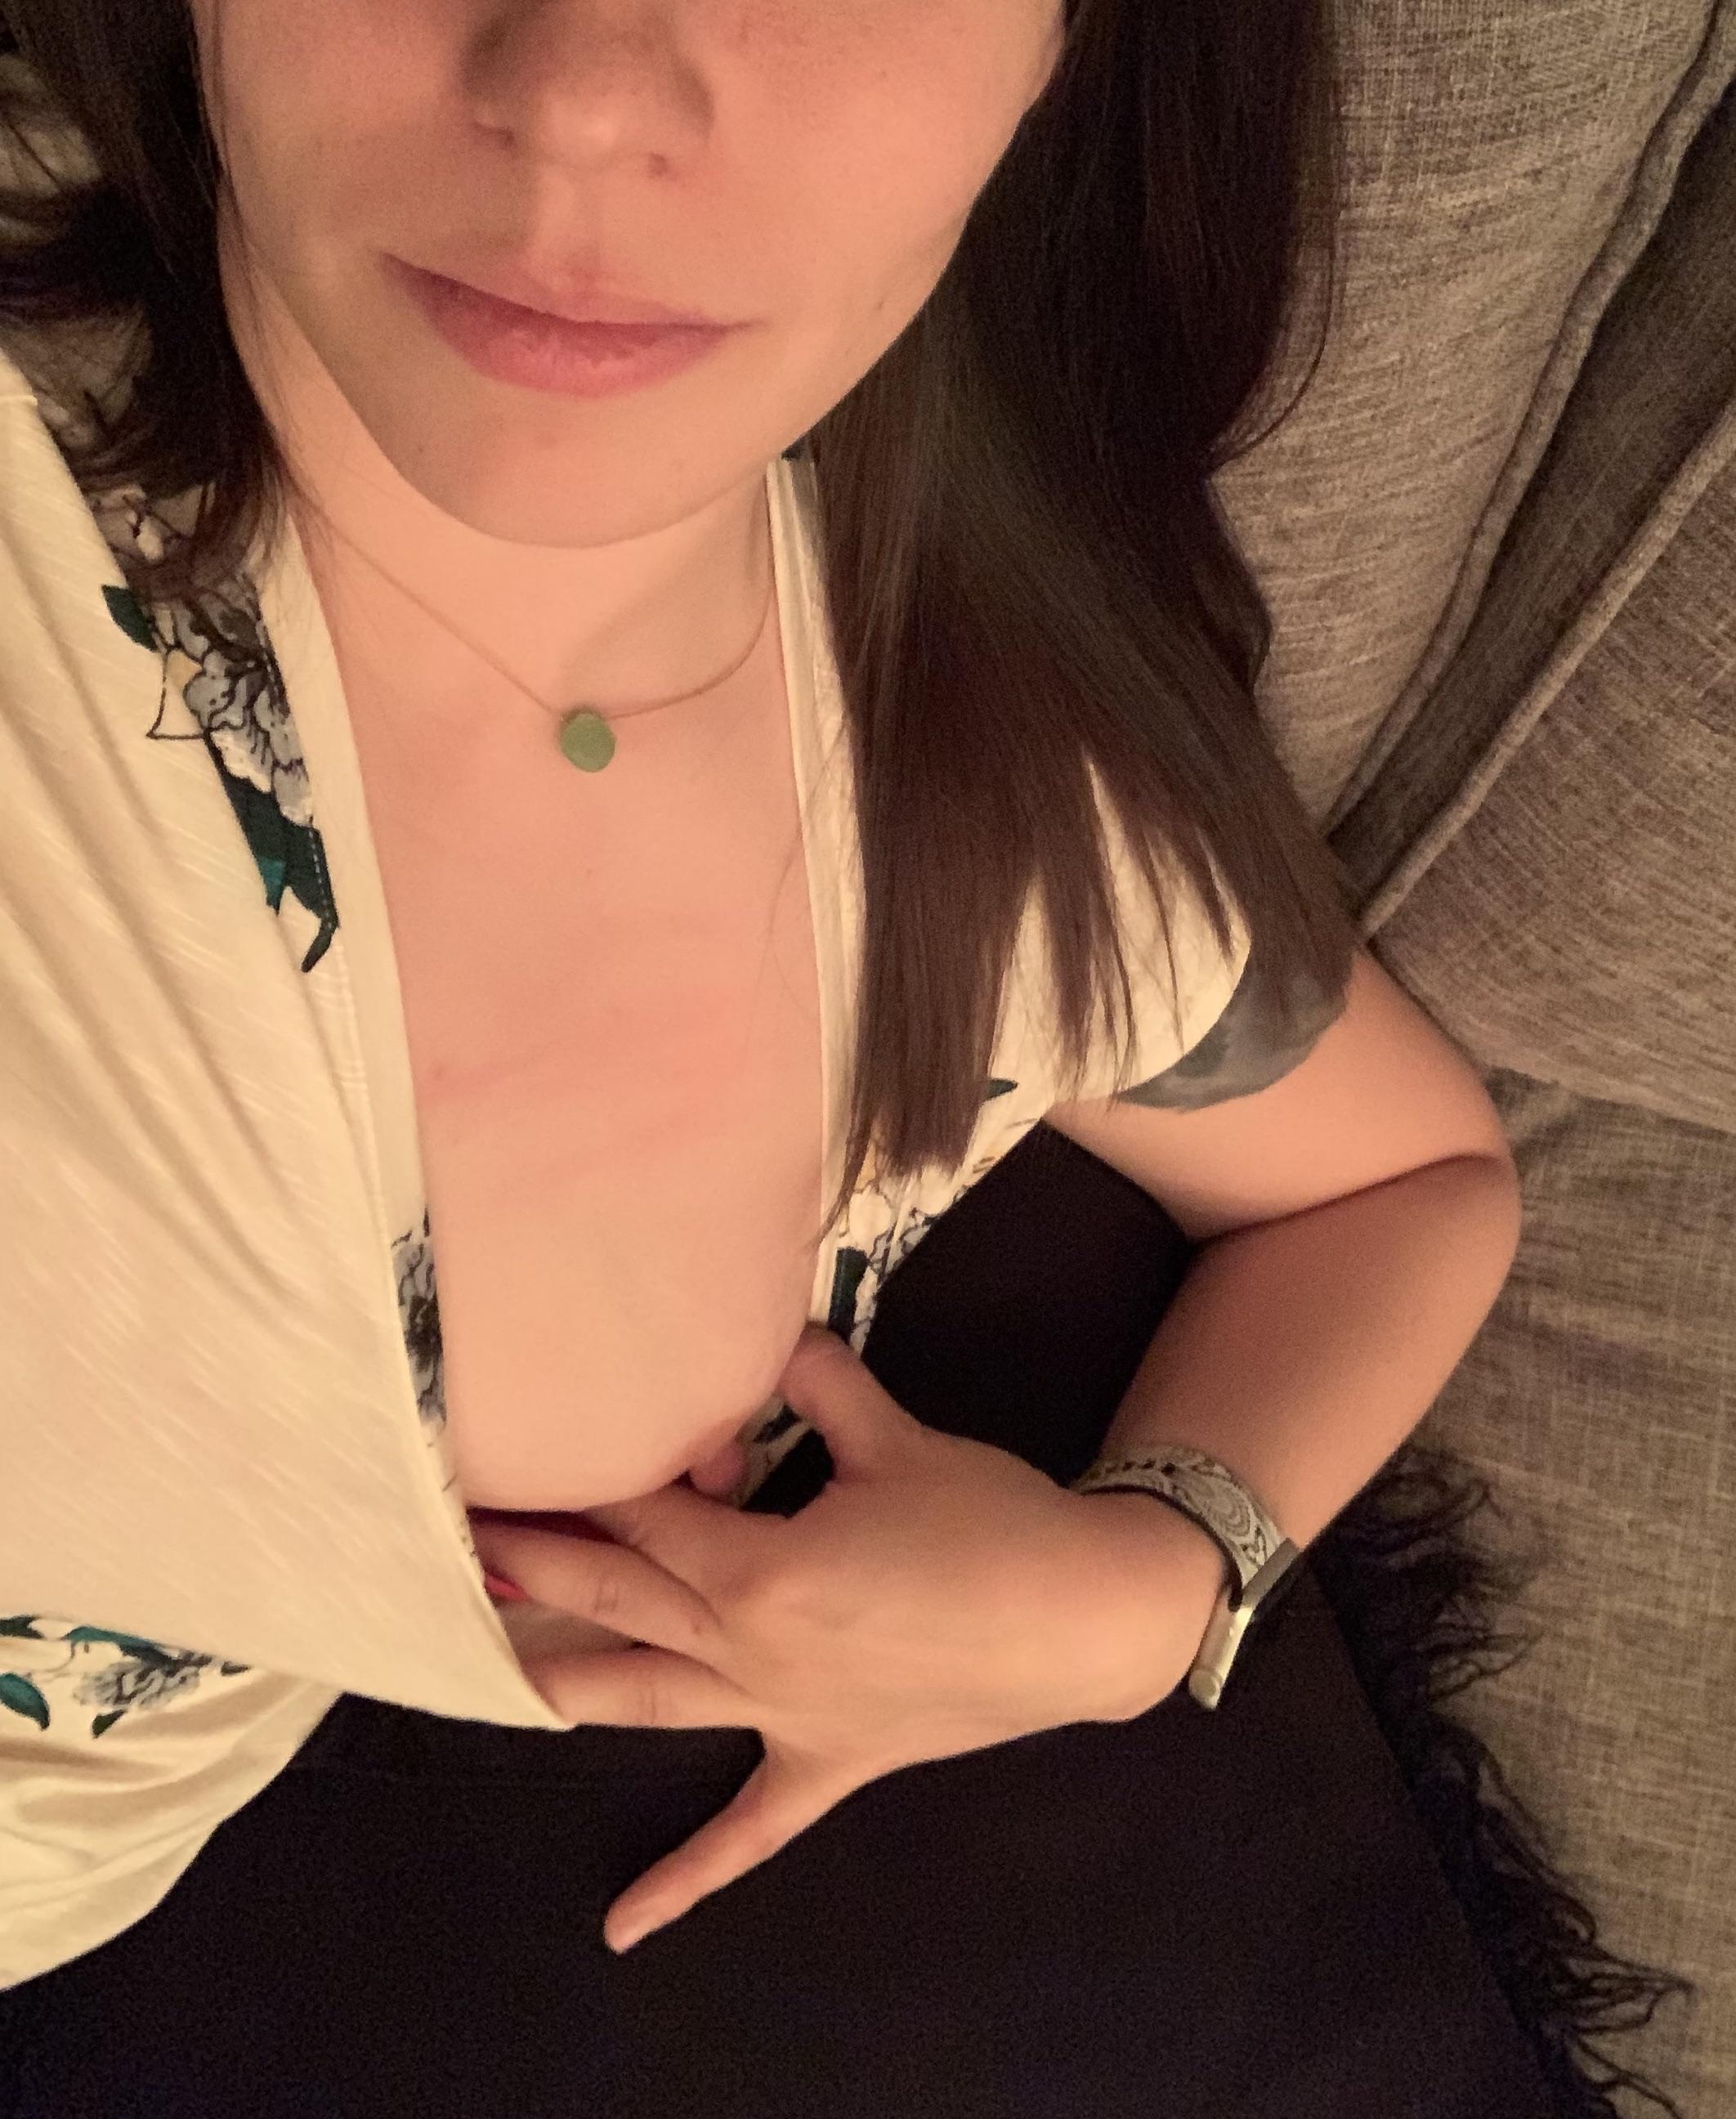 Drunk at a party and showing of my nipples